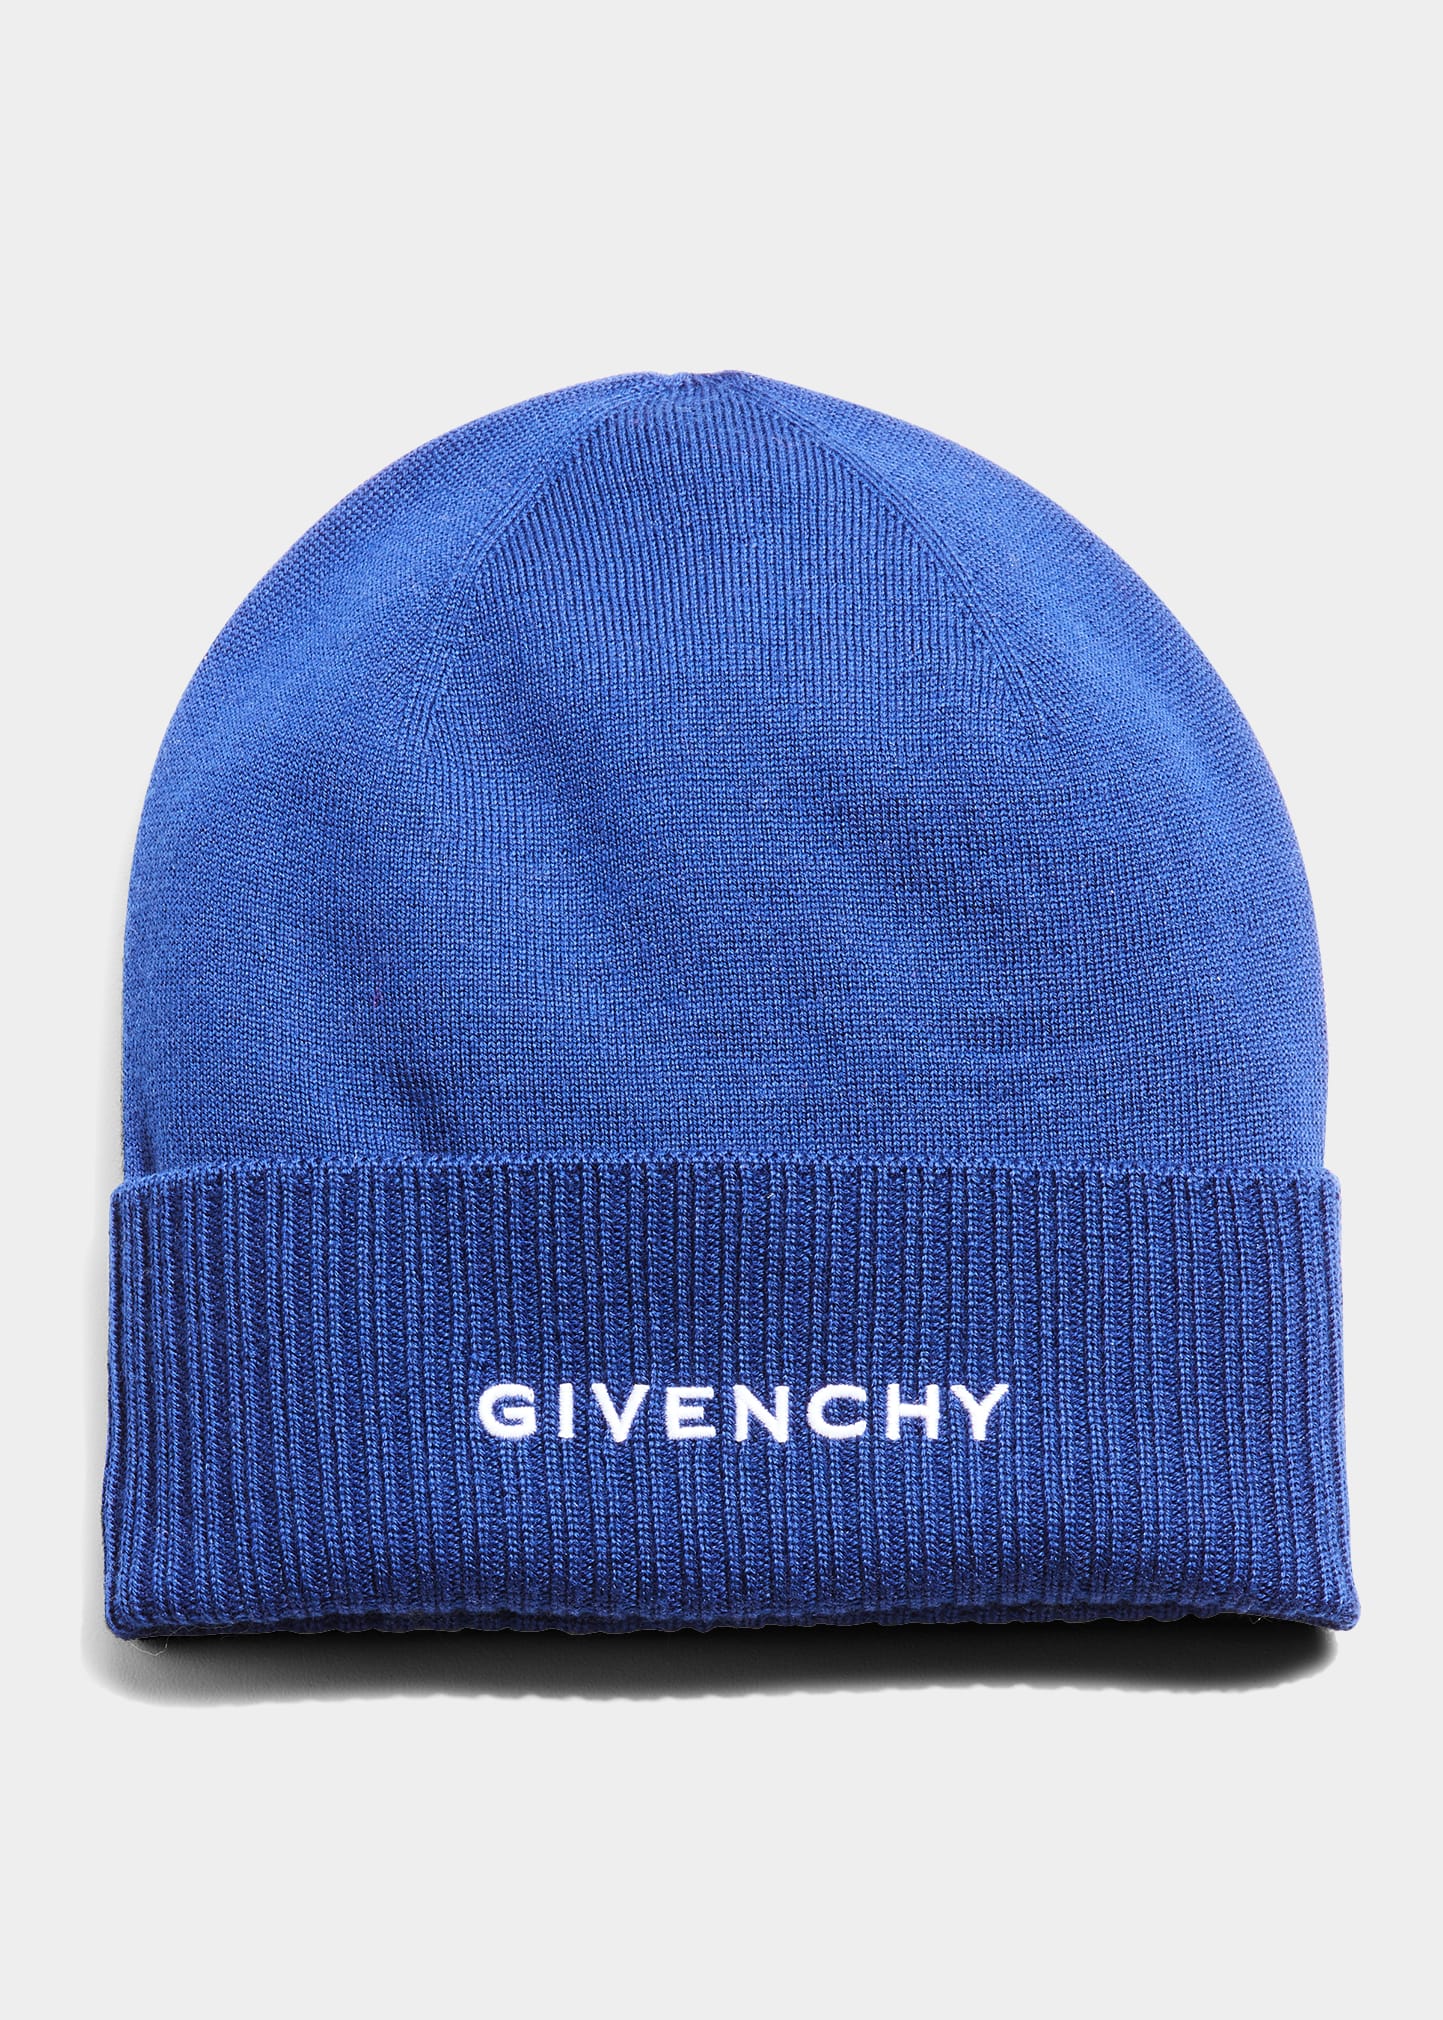 Givenchy Men's Embroidered Logo Wool Beanie Hat In Ocean Blue